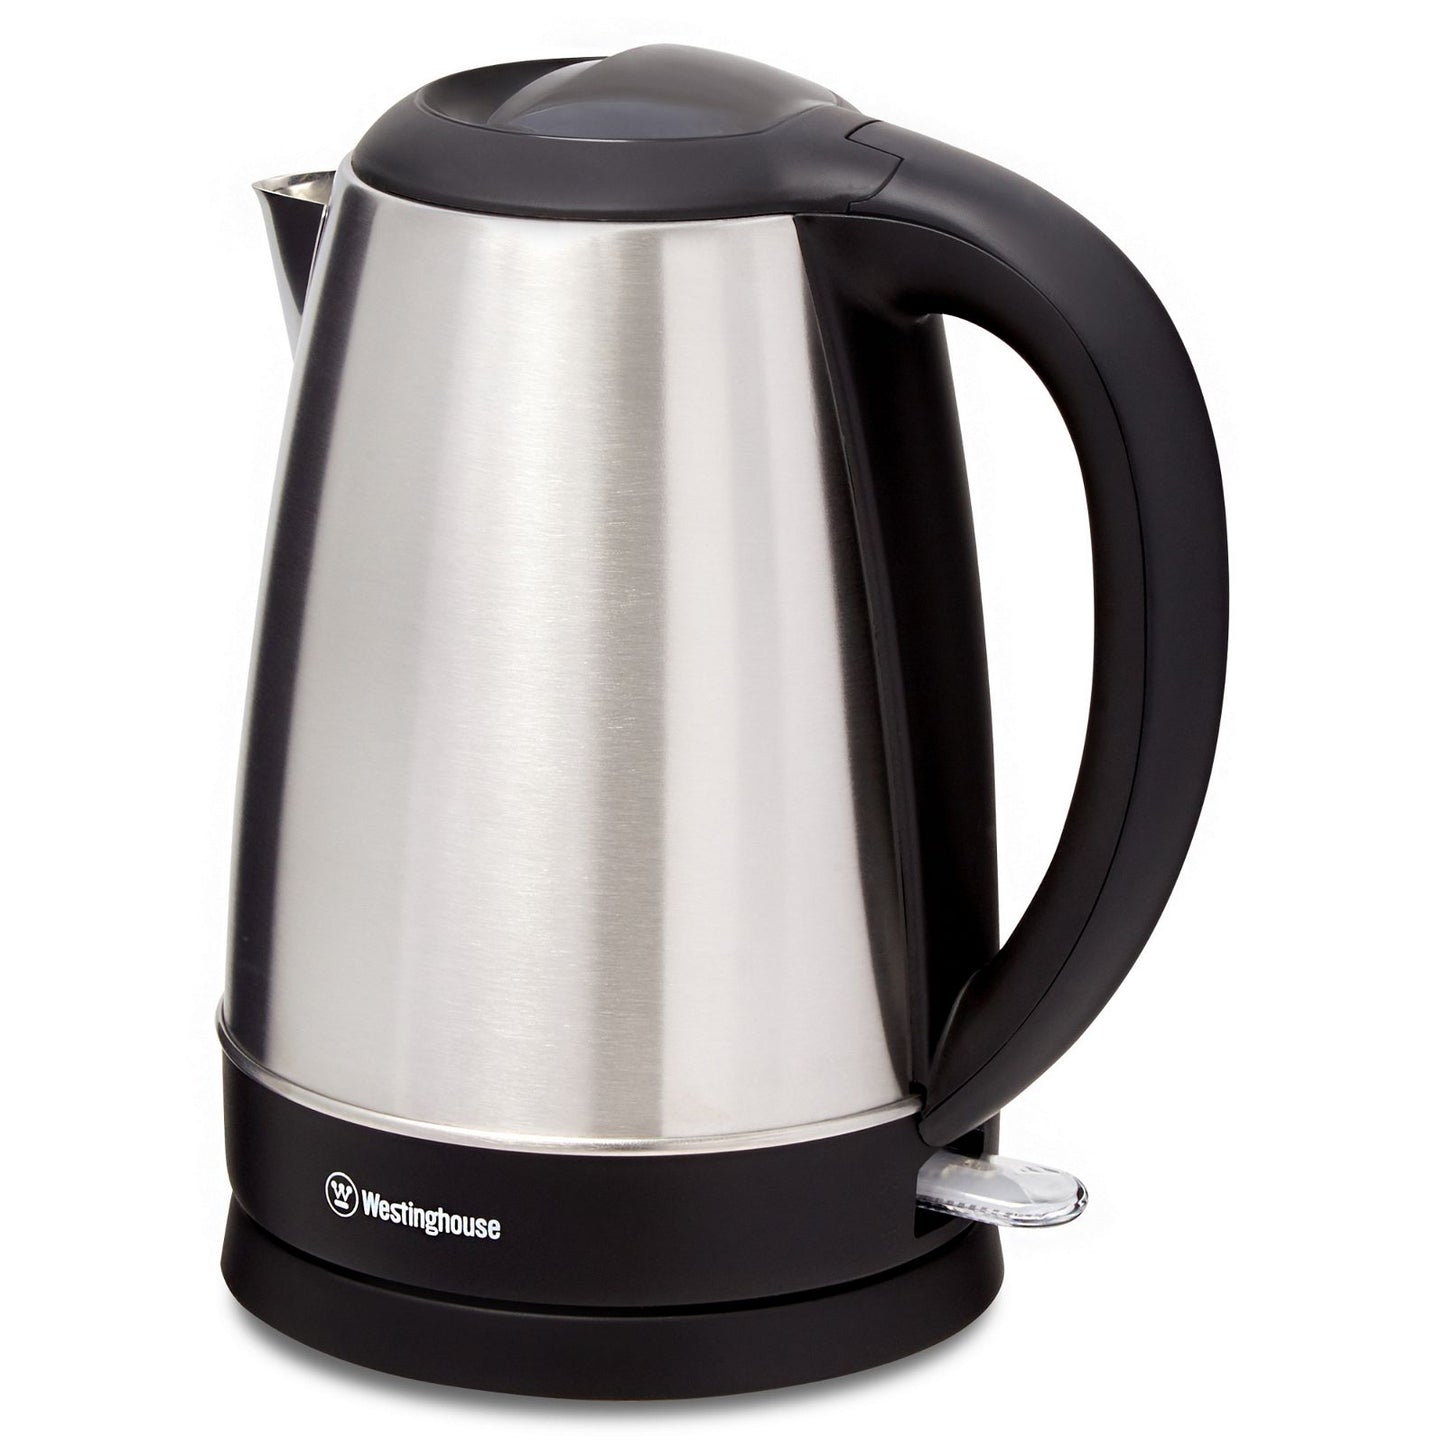 Westinghouse Kettle 1.7L Basics Stainless Steel-#product_category#- Distributed by:  under license